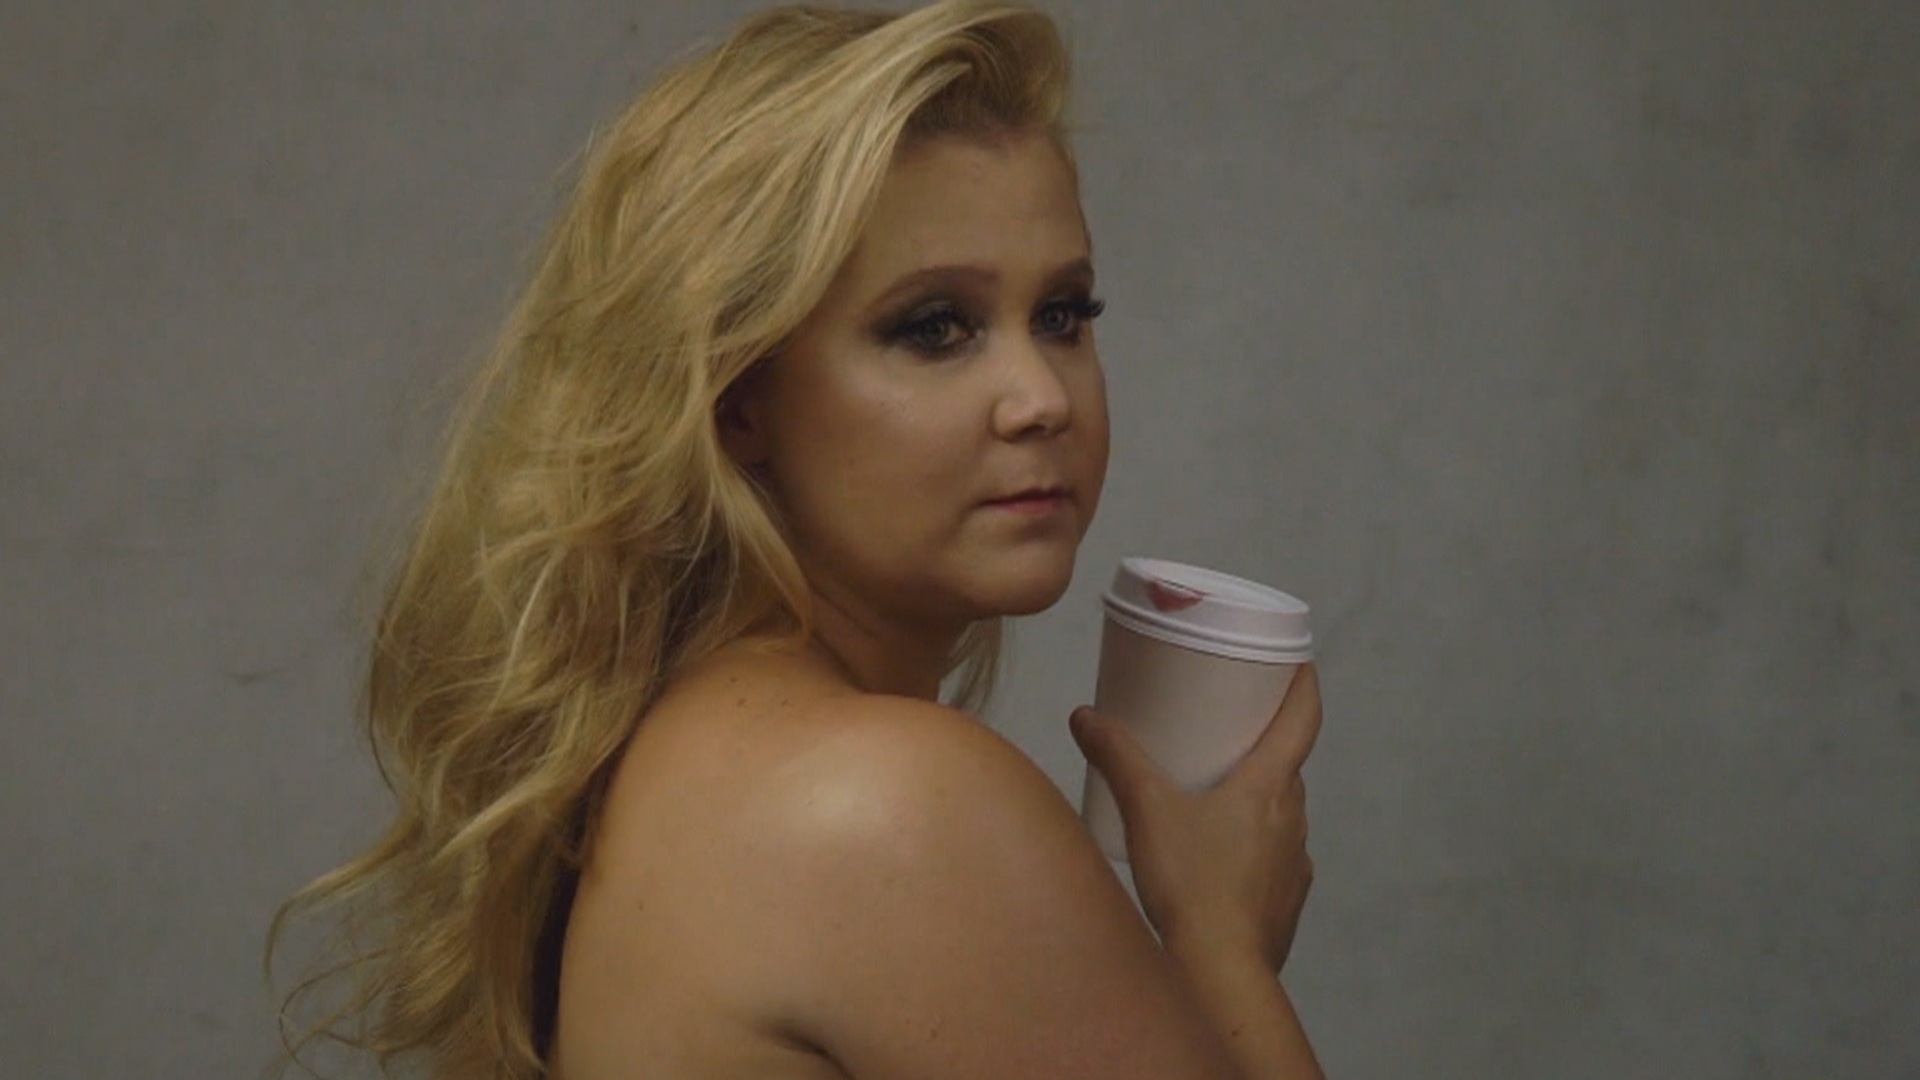 Sexy amy schumer pictures